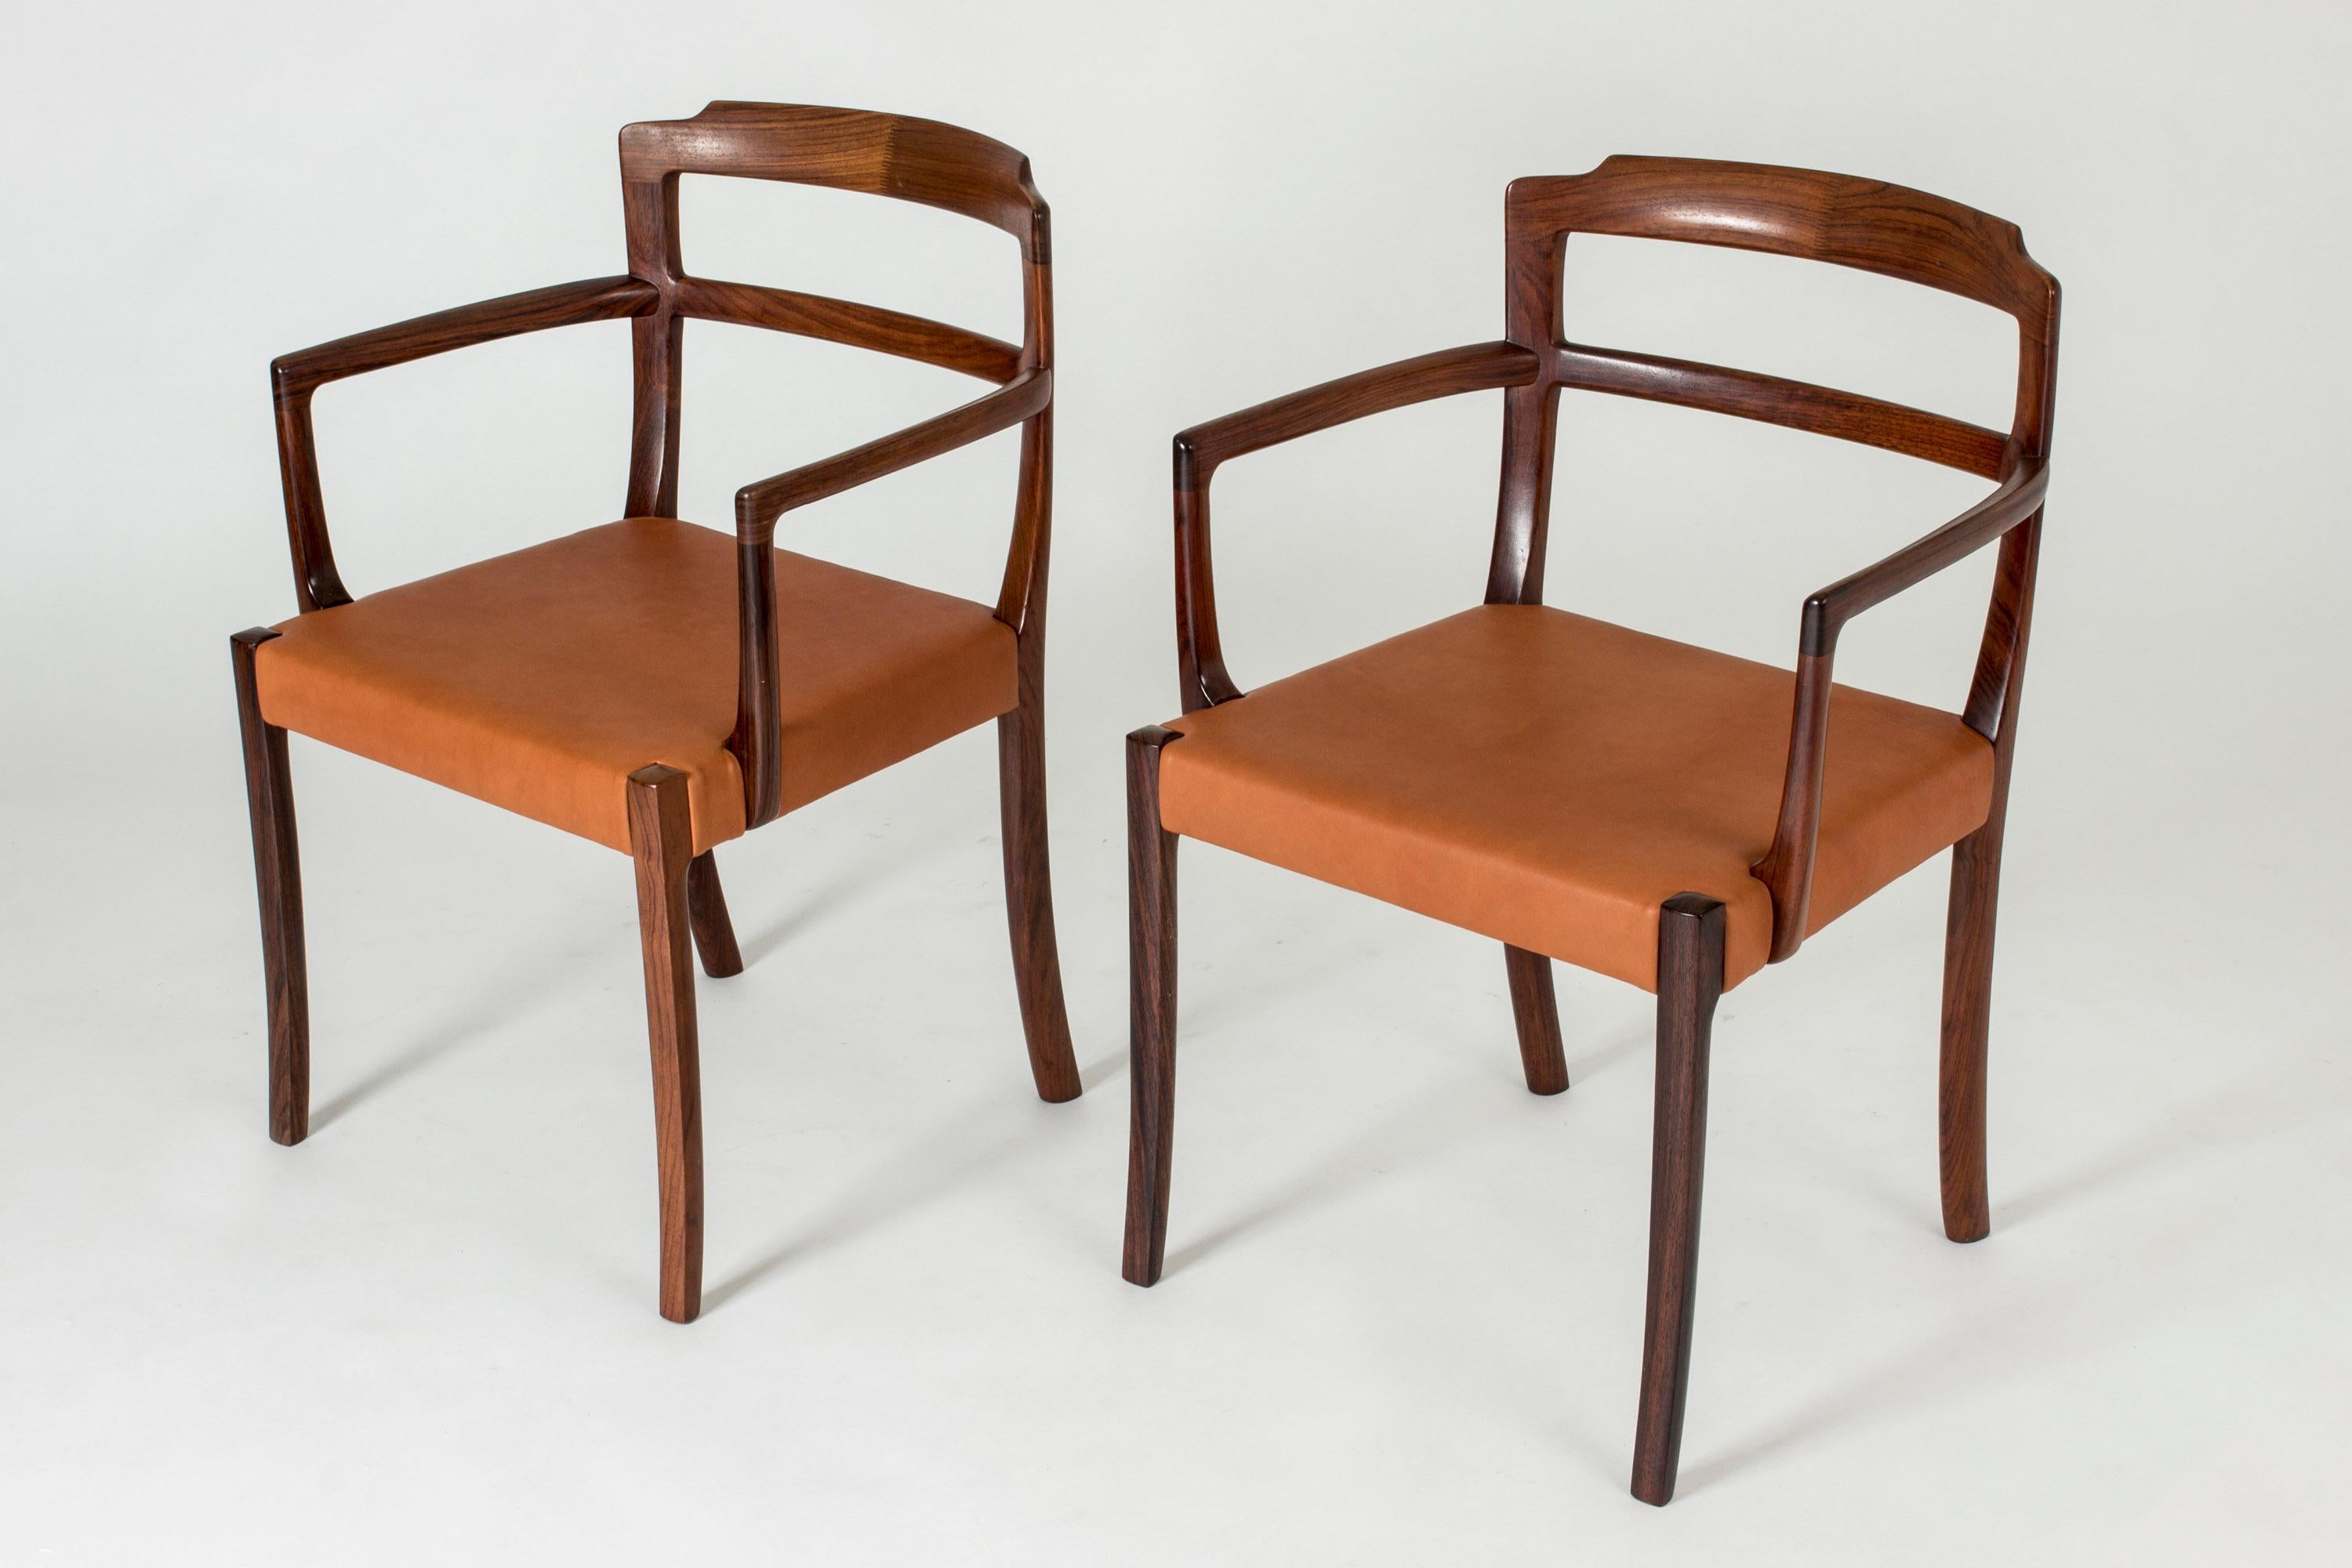 Pair of rosewood armchairs by Ole Wanscher, upholstered with cognac leather seats. Beautifully designed, slender arms and legs.